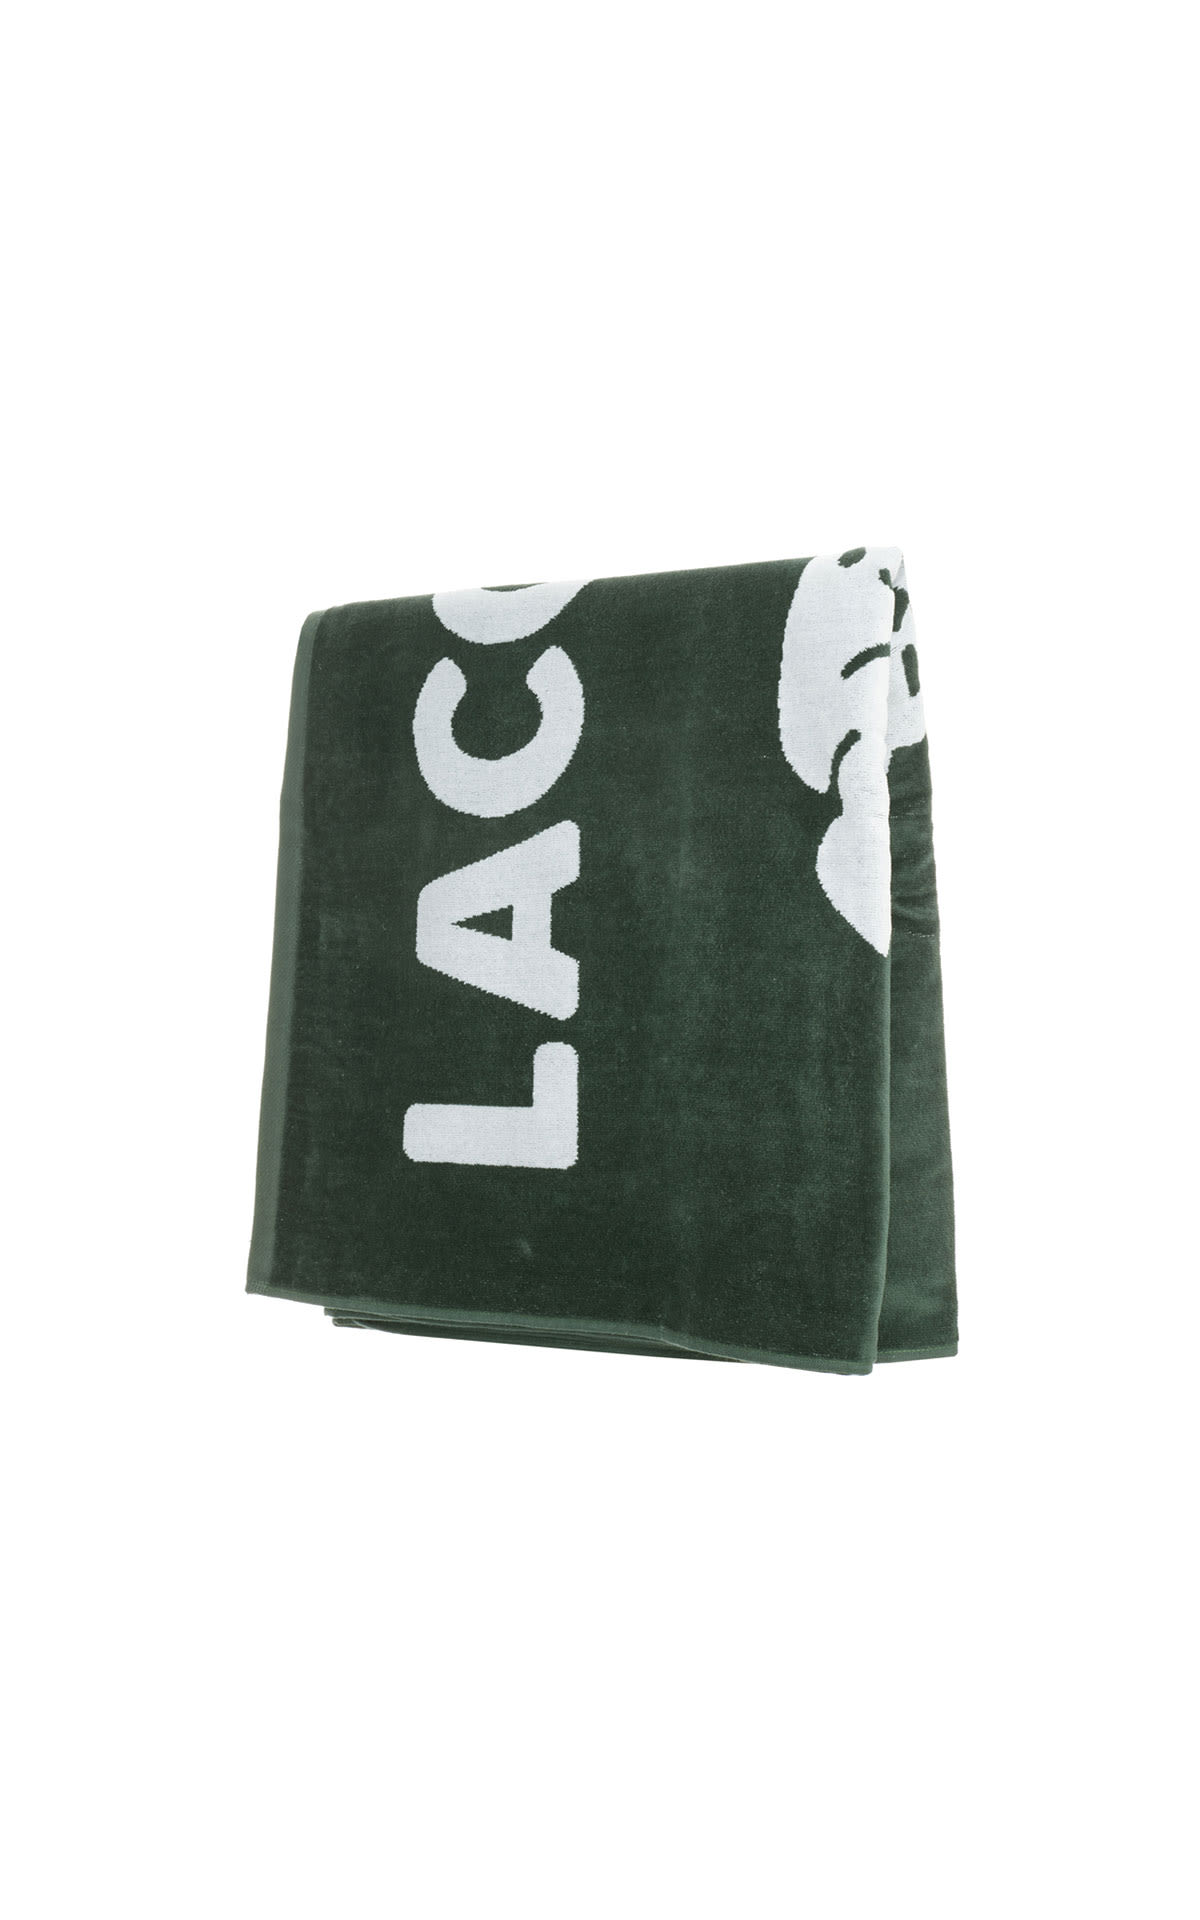 Lacoste Towel from Bicester Village